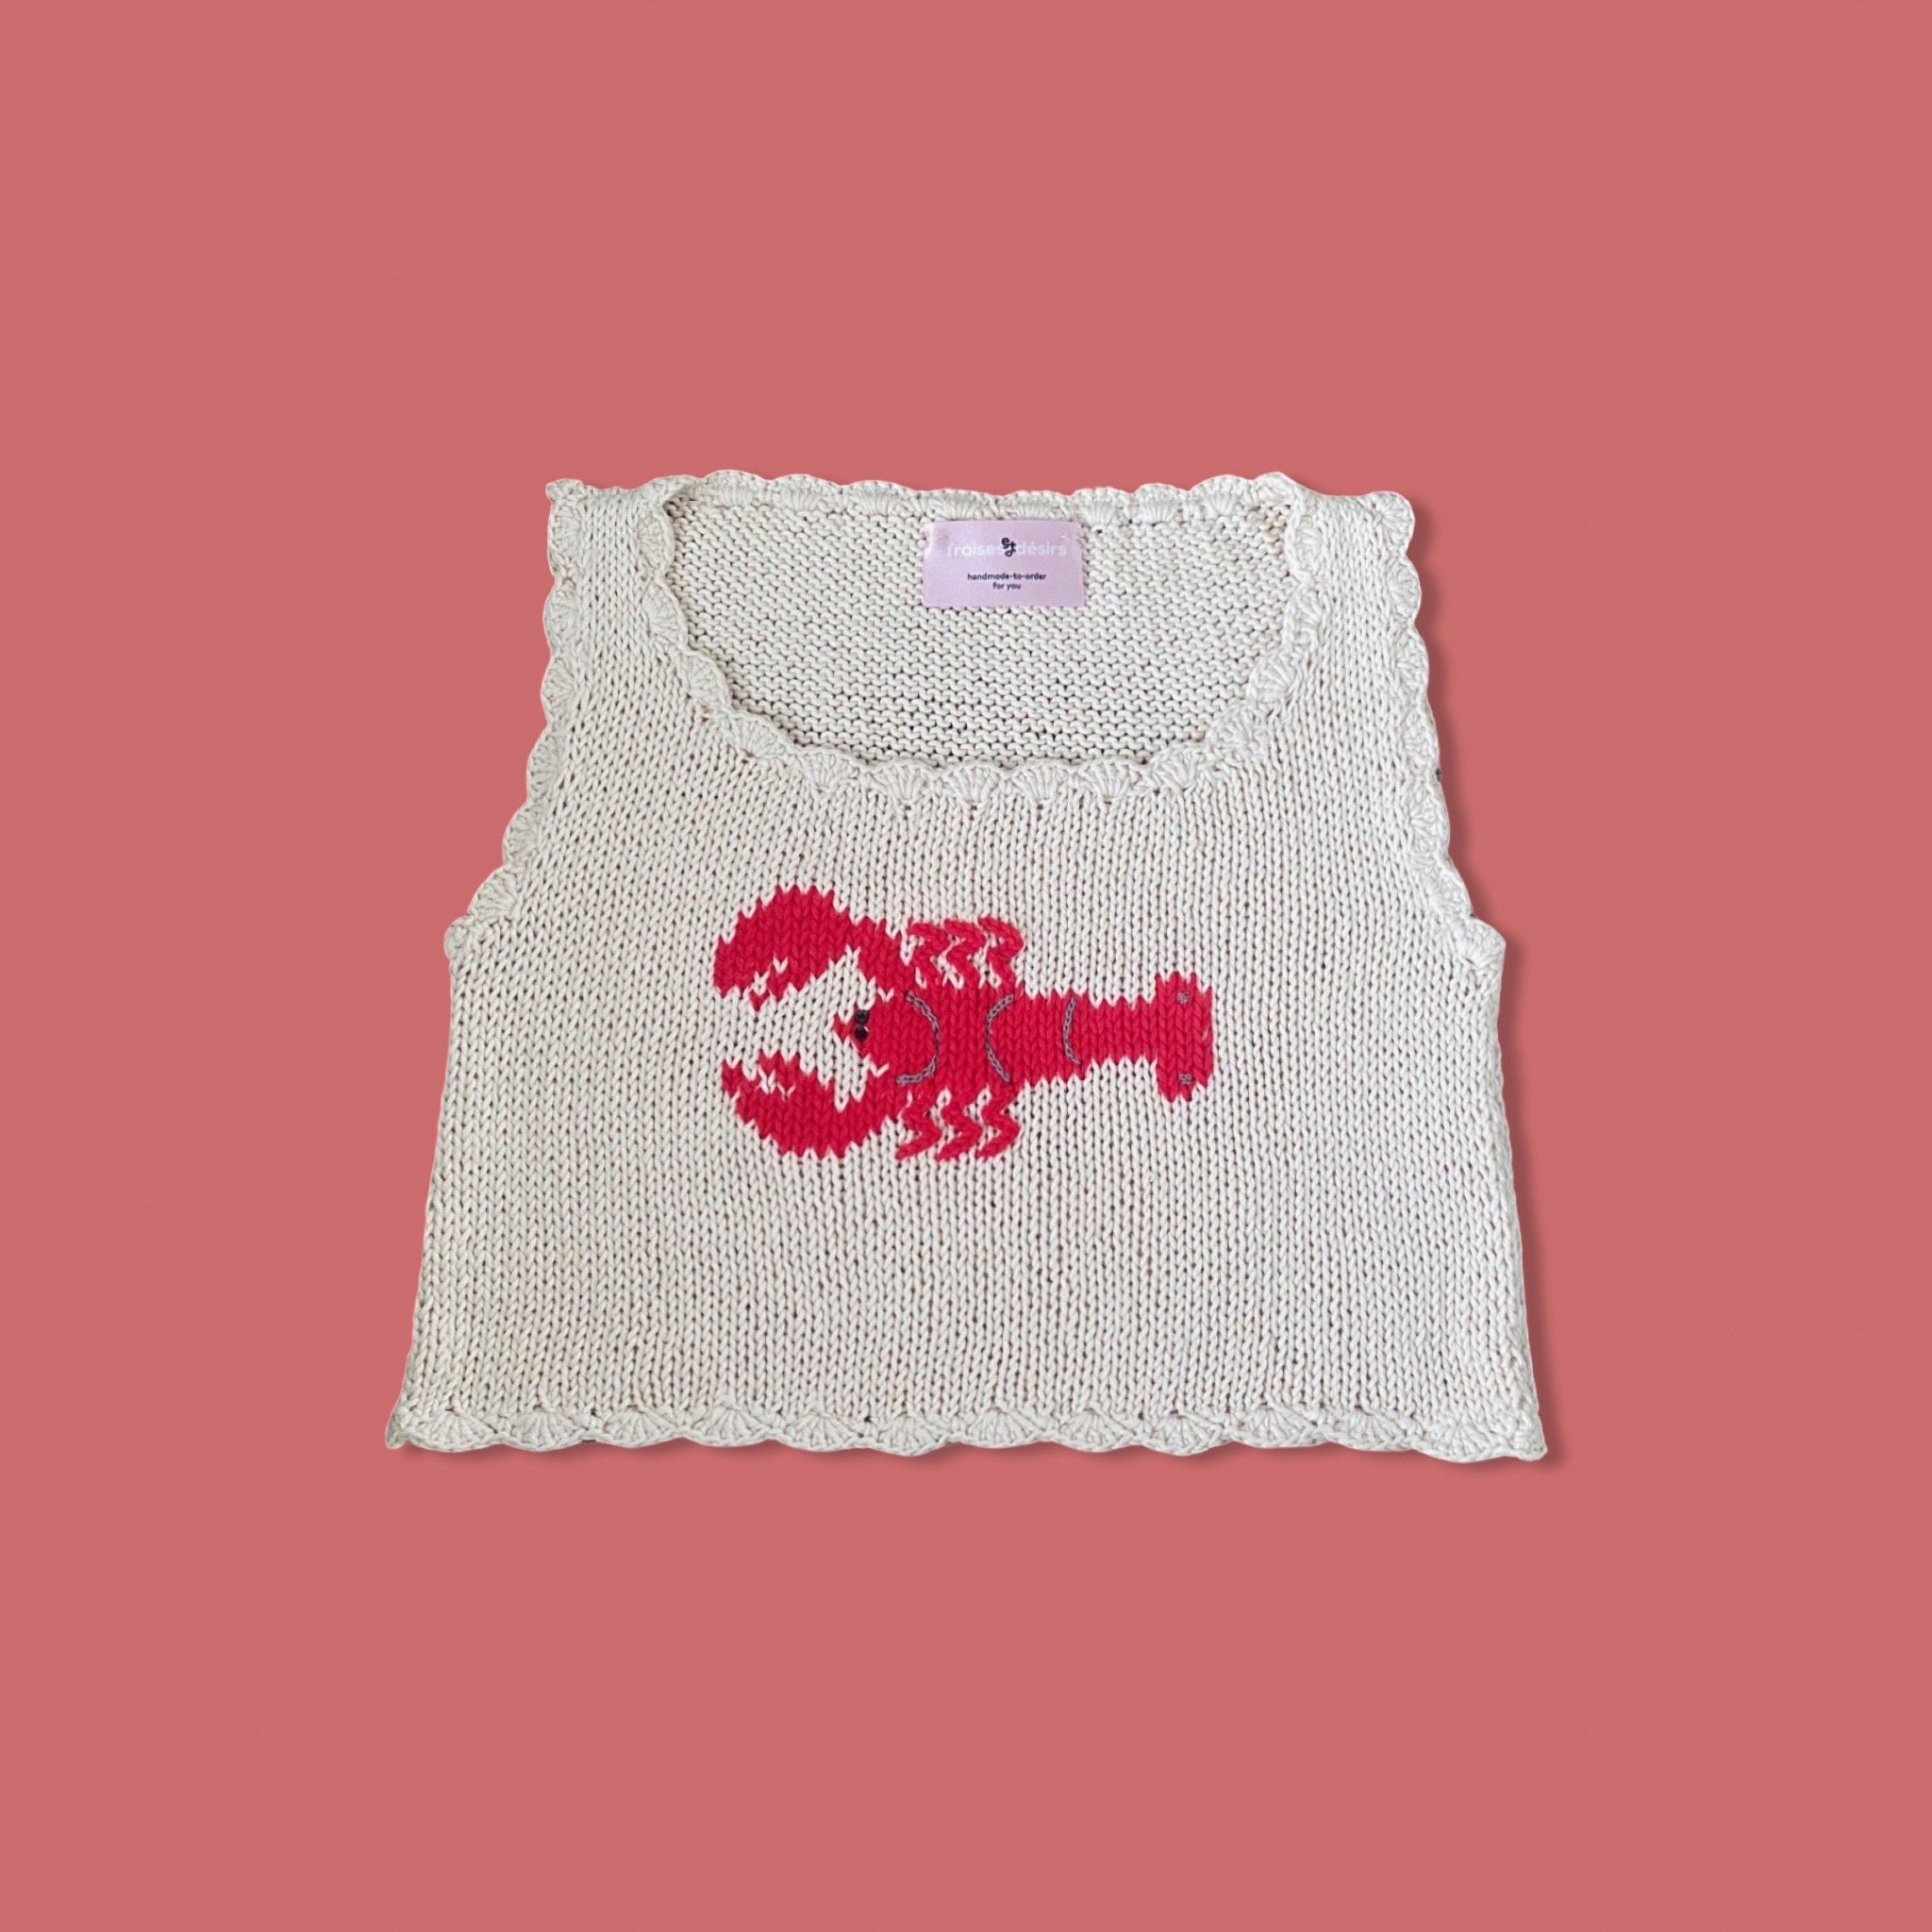 The Lobster tank top